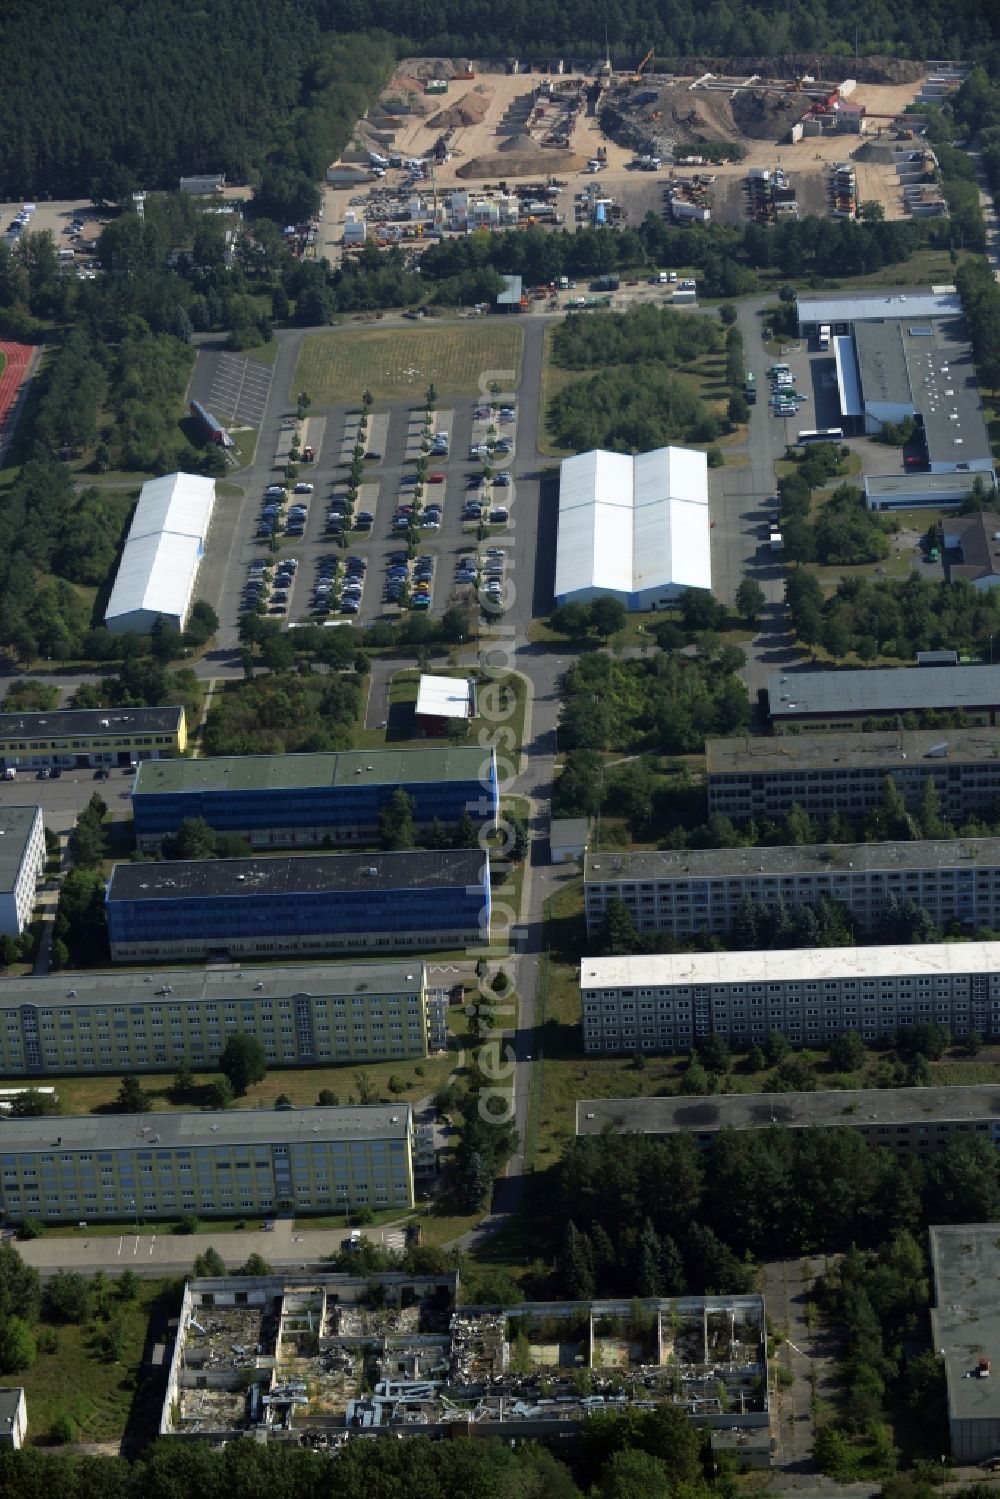 Bad Düben from the bird's eye view: Building complex of the former military barracks in Bad Dueben in the state of Saxony. The buildings are located on Durchwehnaer Strasse in the East of the town and include sports facilities and companies.